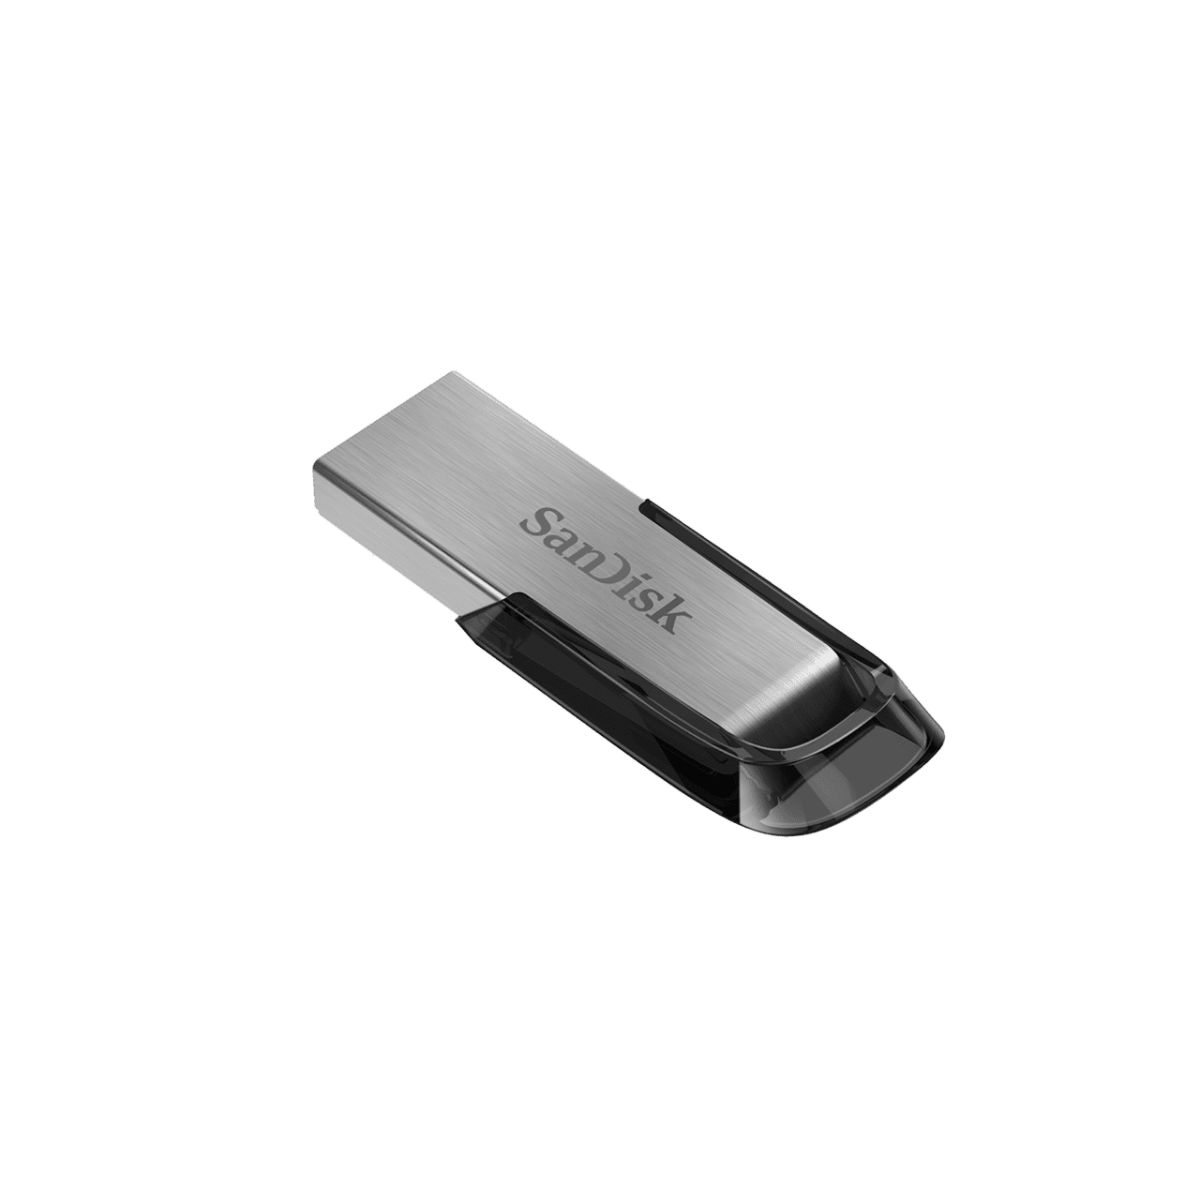 Ultra Flair Usb 3 0 Right.png.thumb .1280.1280 Sandisk &Lt;Div Class=&Quot;Inheritpara Mb-4&Quot;&Gt; The Sandisk Ultra Flair™ Usb 3.0 Flash Drive Moves Your Files Fast. Spend Less Time Waiting To Transfer Files And Enjoy High-Speed Usb 3.0 Performance Of Up To 150Mb/S&Lt;A Class=&Quot;Disclosure&Quot; Href=&Quot;Https://Shop.westerndigital.com/Products/Usb-Flash-Drives/Sandisk-Ultra-Flair-Usb-3-0#Disclosures&Quot; Target=&Quot;_Self&Quot; Rel=&Quot;Noopener Noreferrer&Quot; Aria-Labelledby=&Quot;Disclosures&Quot;&Gt;&Lt;Sup&Gt;**&Lt;/Sup&Gt;&Lt;/A&Gt;. Its Durable And Sleek Metal Casing Is Tough Enough To Handle Knocks With Style. And, With Password Protection, You Can Rest Assured That Your Private Files Stay Private&Lt;A Class=&Quot;Disclosure&Quot; Href=&Quot;Https://Shop.westerndigital.com/Products/Usb-Flash-Drives/Sandisk-Ultra-Flair-Usb-3-0#Disclosures&Quot; Target=&Quot;_Self&Quot; Rel=&Quot;Noopener Noreferrer&Quot; Aria-Labelledby=&Quot;Disclosures&Quot;&Gt;&Lt;Sup&Gt;1&Lt;/Sup&Gt;&Lt;/A&Gt;. Store Your Files In Style With The Sandisk Ultra Flair Usb 3.0 Flash Drive. &Lt;Strong&Gt;Warranty&Lt;/Strong&Gt; The Sandisk Ultra Flair Usb 3.0 Flash Drive Is Backed By A Five-Year Manufacturer Warranty&Lt;A Class=&Quot;Disclosure&Quot; Href=&Quot;Https://Shop.westerndigital.com/Products/Usb-Flash-Drives/Sandisk-Ultra-Flair-Usb-3-0#Disclosures&Quot; Target=&Quot;_Self&Quot; Rel=&Quot;Noopener Noreferrer&Quot; Aria-Labelledby=&Quot;Disclosures&Quot;&Gt;&Lt;Sup&Gt;2&Lt;/Sup&Gt;&Lt;/A&Gt; &Lt;/Div&Gt; Sandisk Sandisk Ultra Flair Usb 3.0 Flash Drive (32Gb)